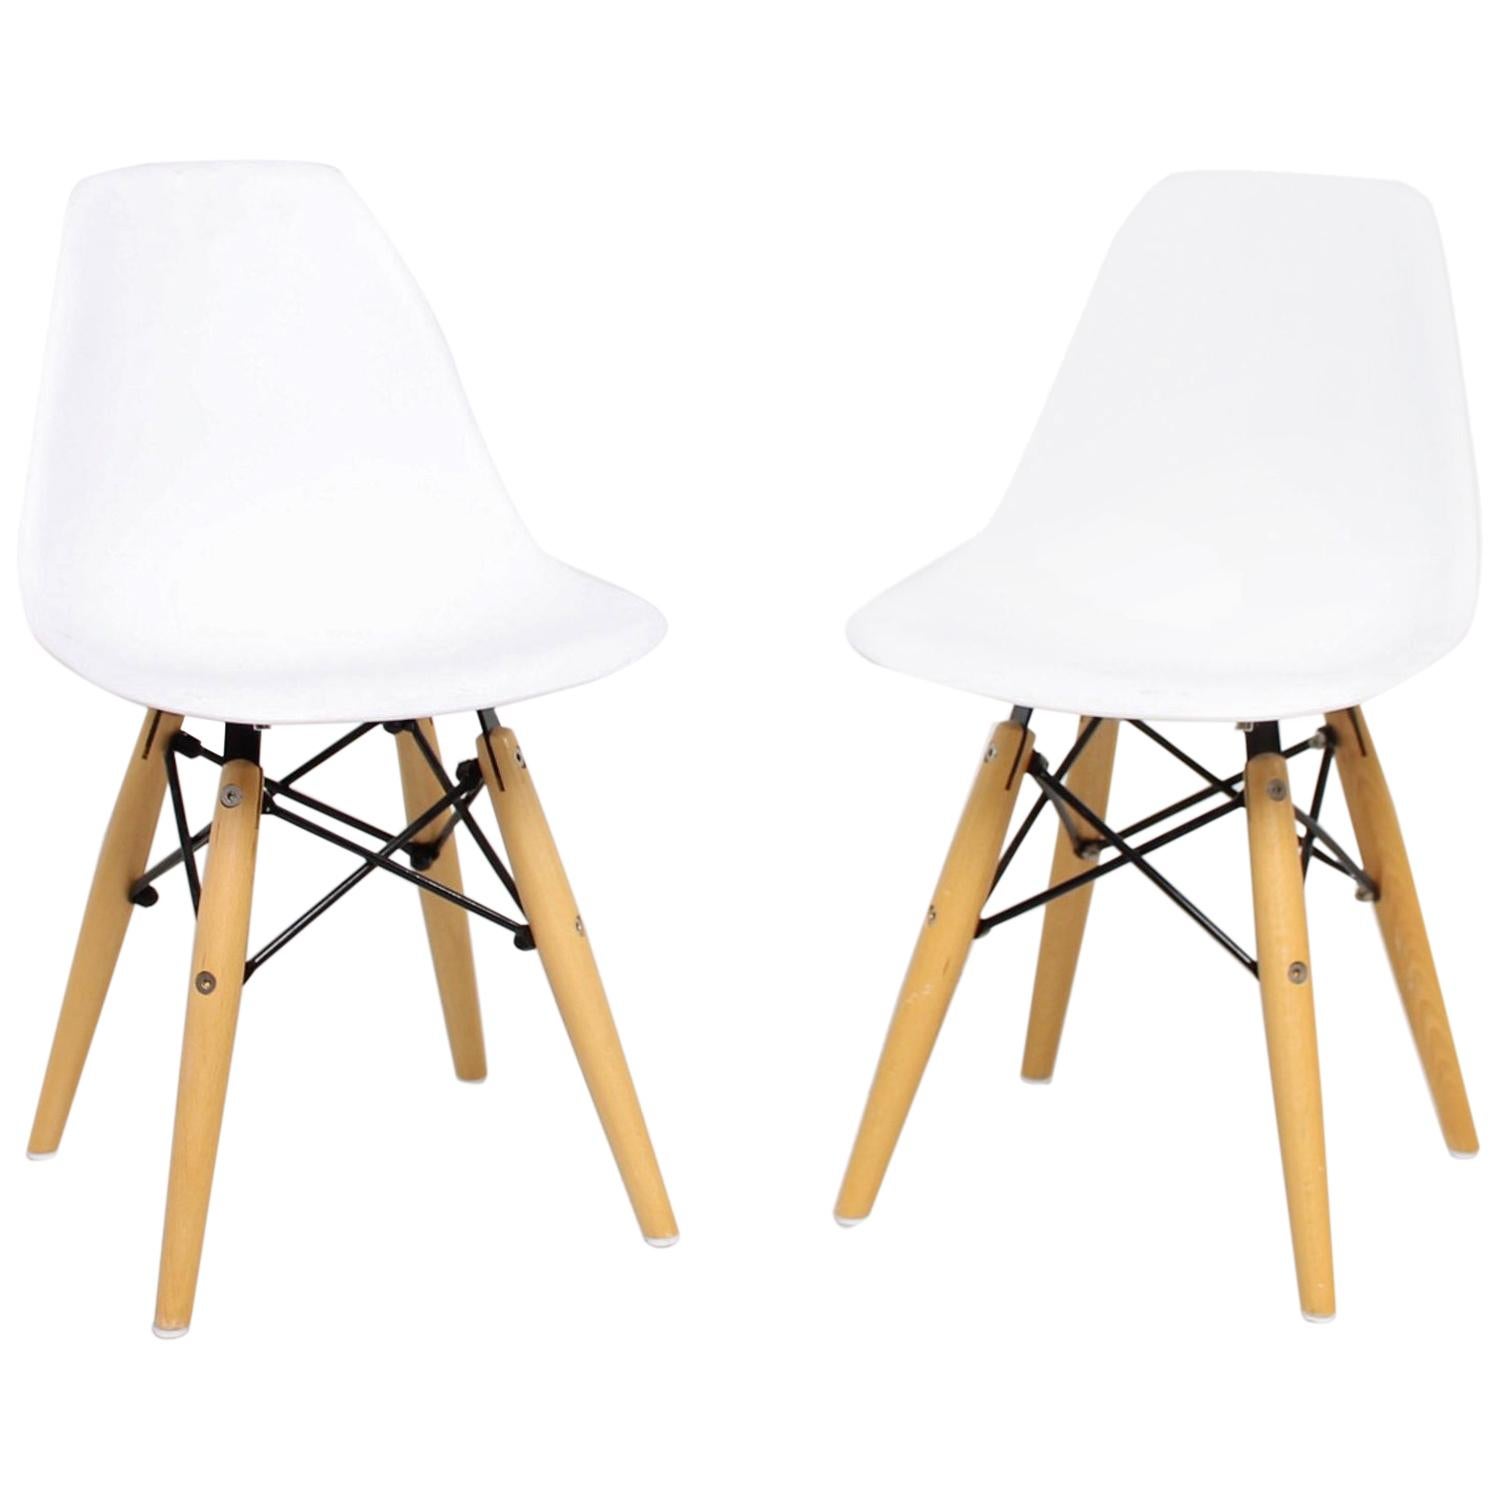 Modern Fun Eiffel Kids Chairs in White Plastic and Wood Stylish Classic Eames